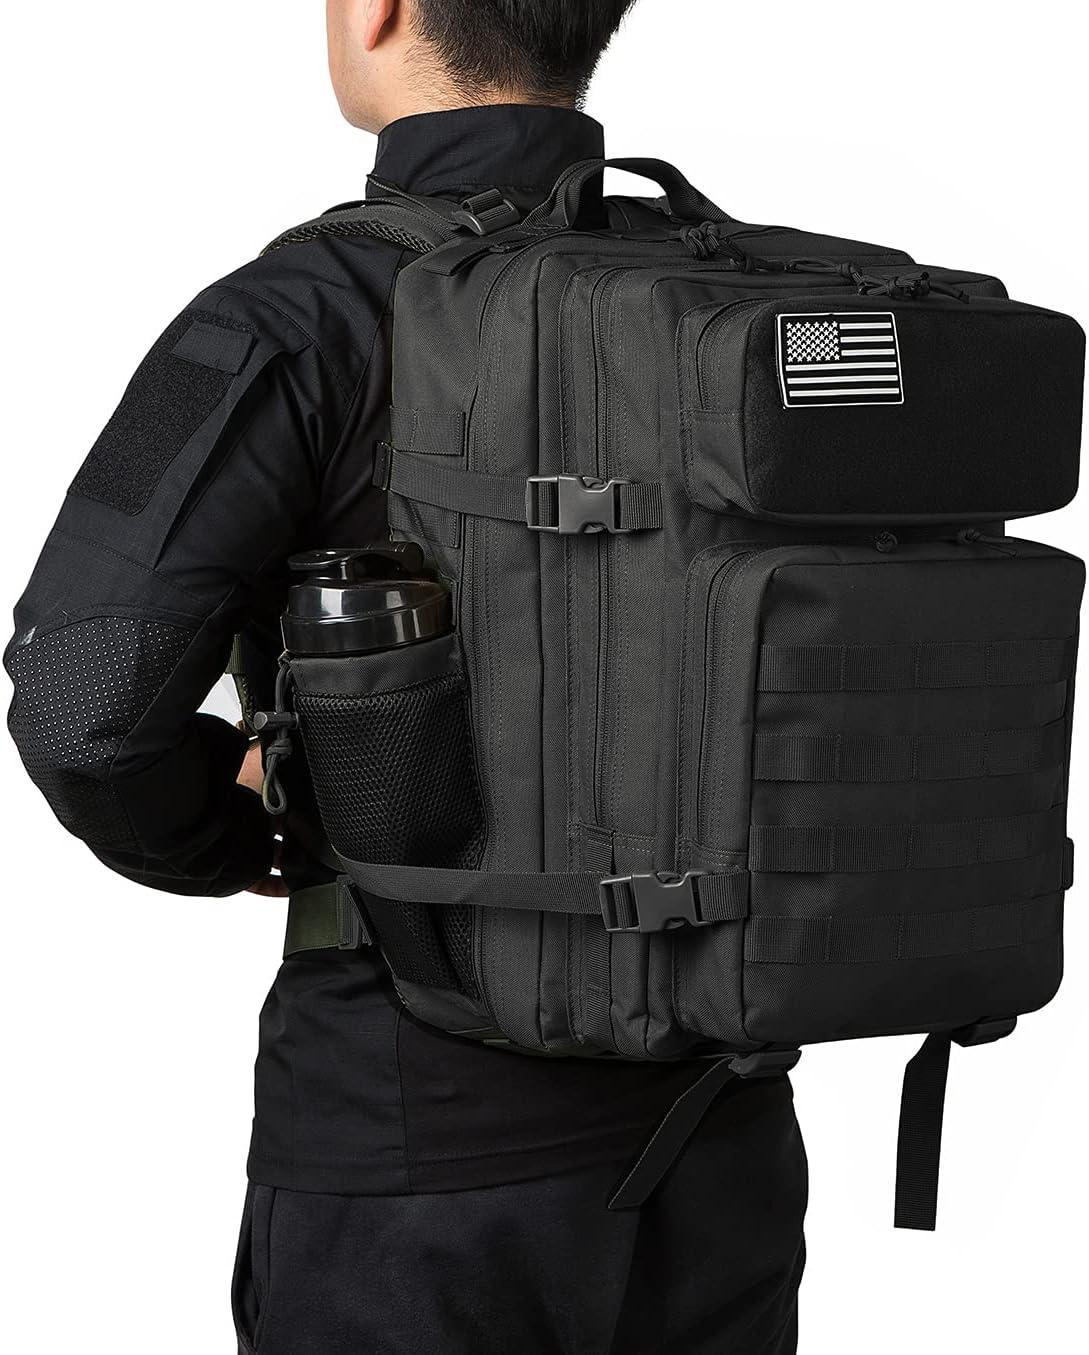 35L Large Capacity Military Tactical Backpack